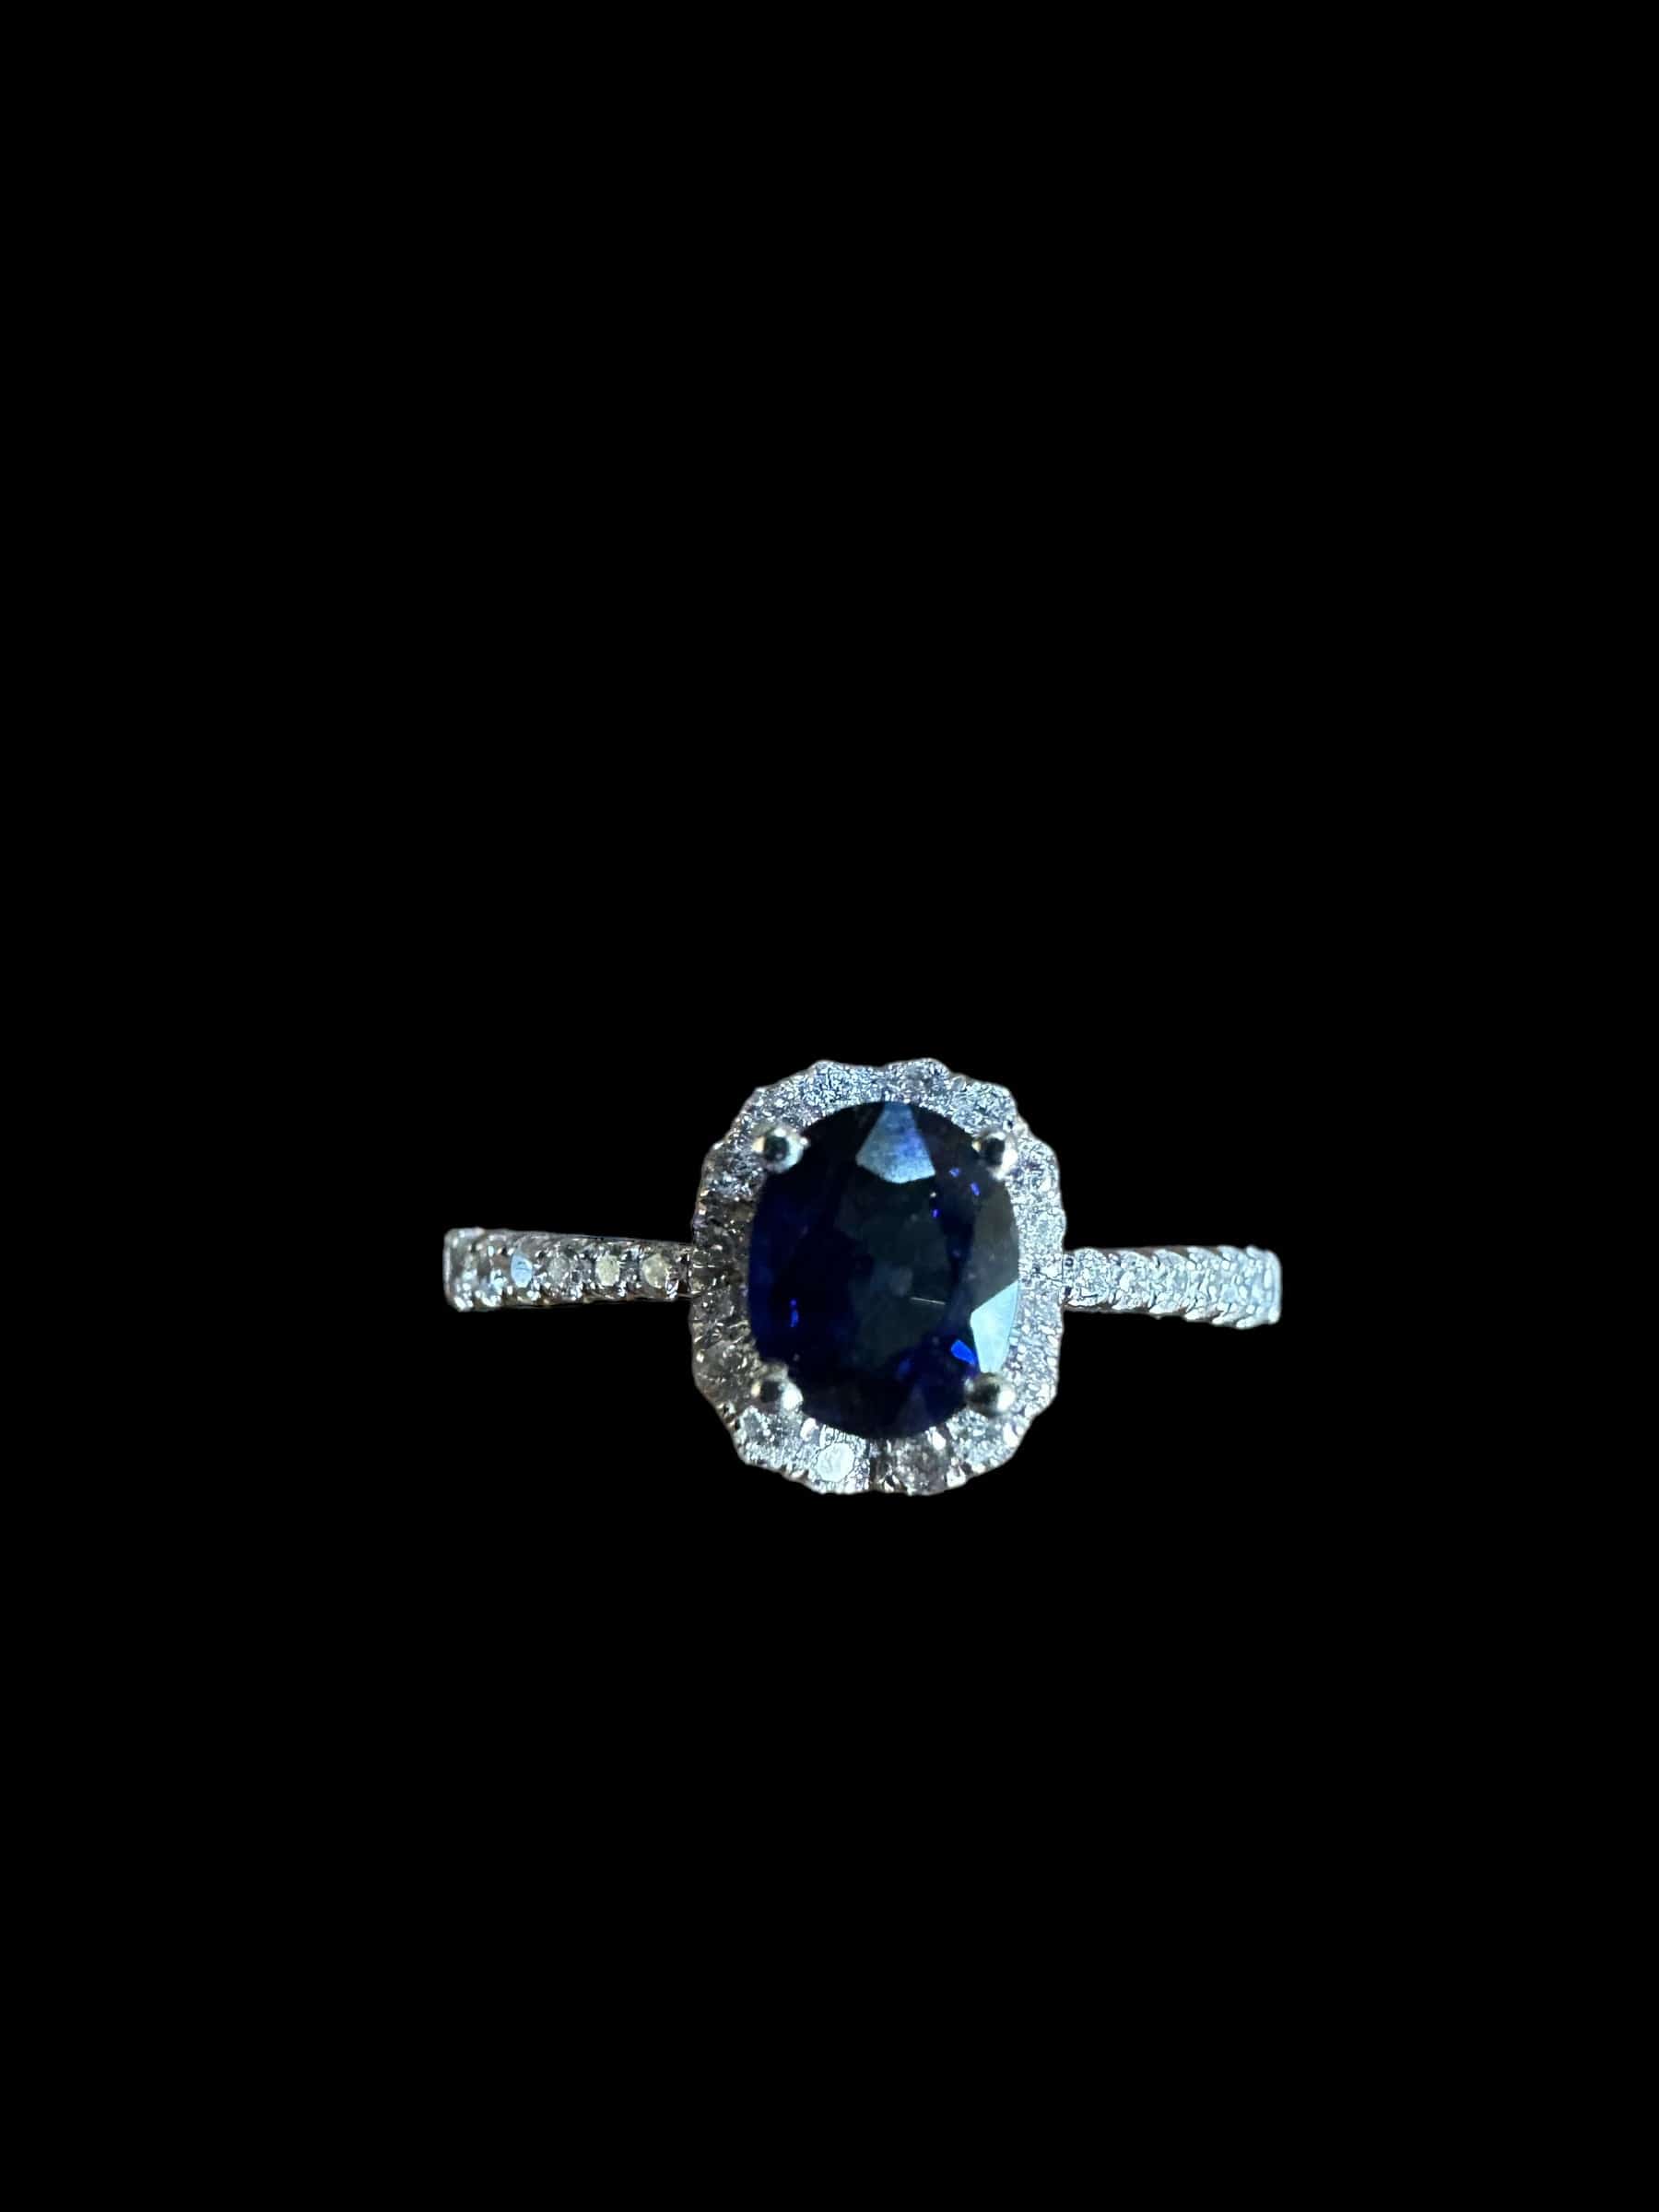 Luxury Promise Oval Sapphire Ring surrounded with White diamonds and on Band set in 18K White Gold